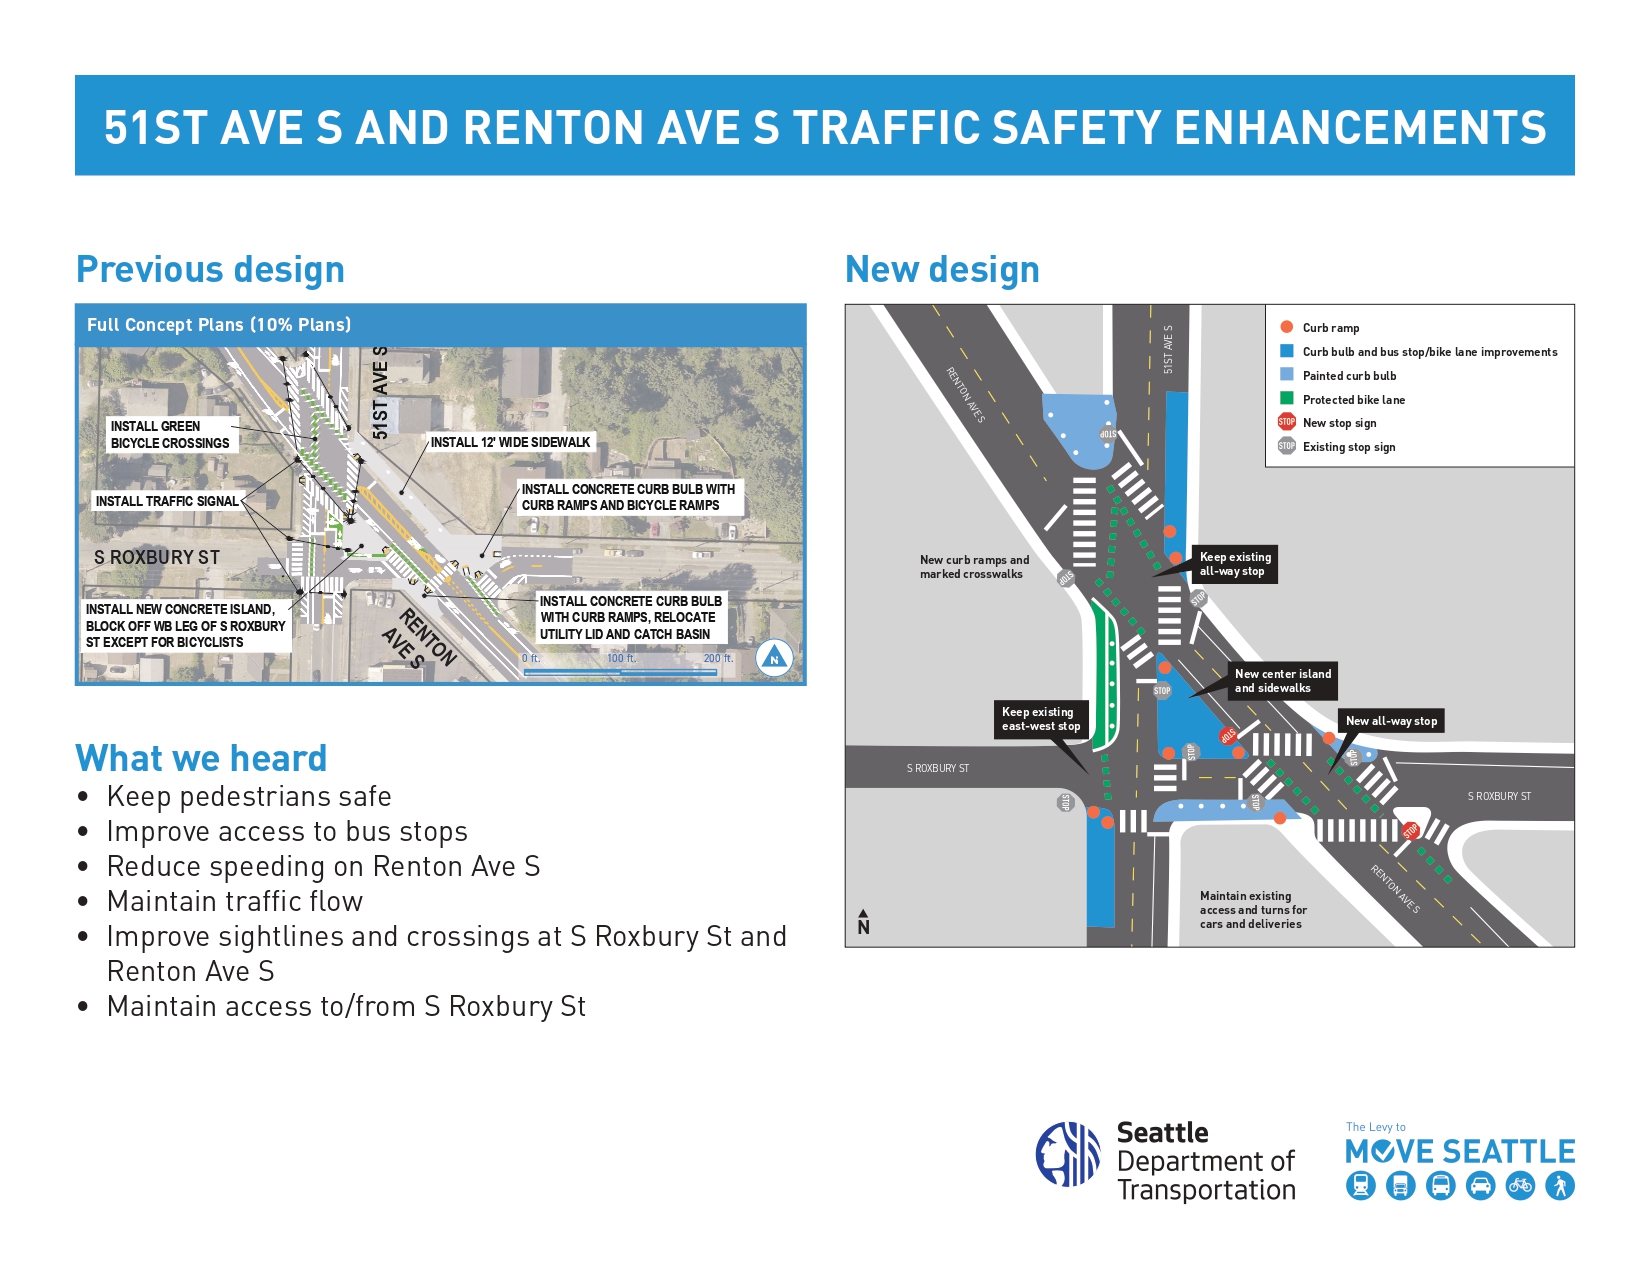 51st Ave S and Renton Ave S Traffic Safety Enhancements design comparison graphic